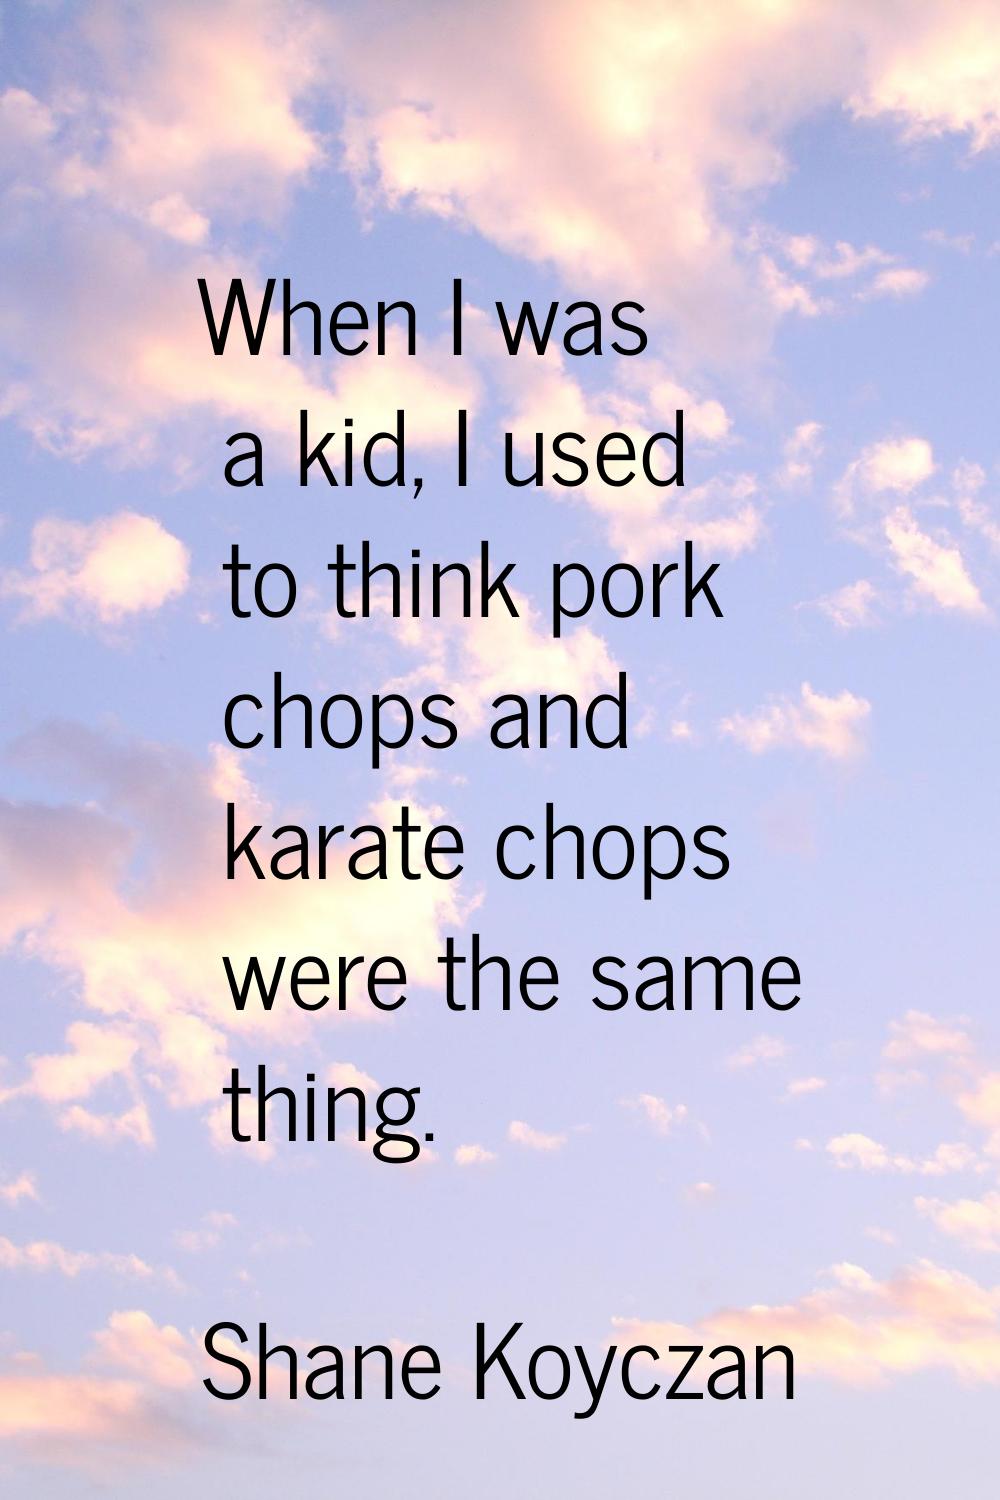 When I was a kid, I used to think pork chops and karate chops were the same thing.